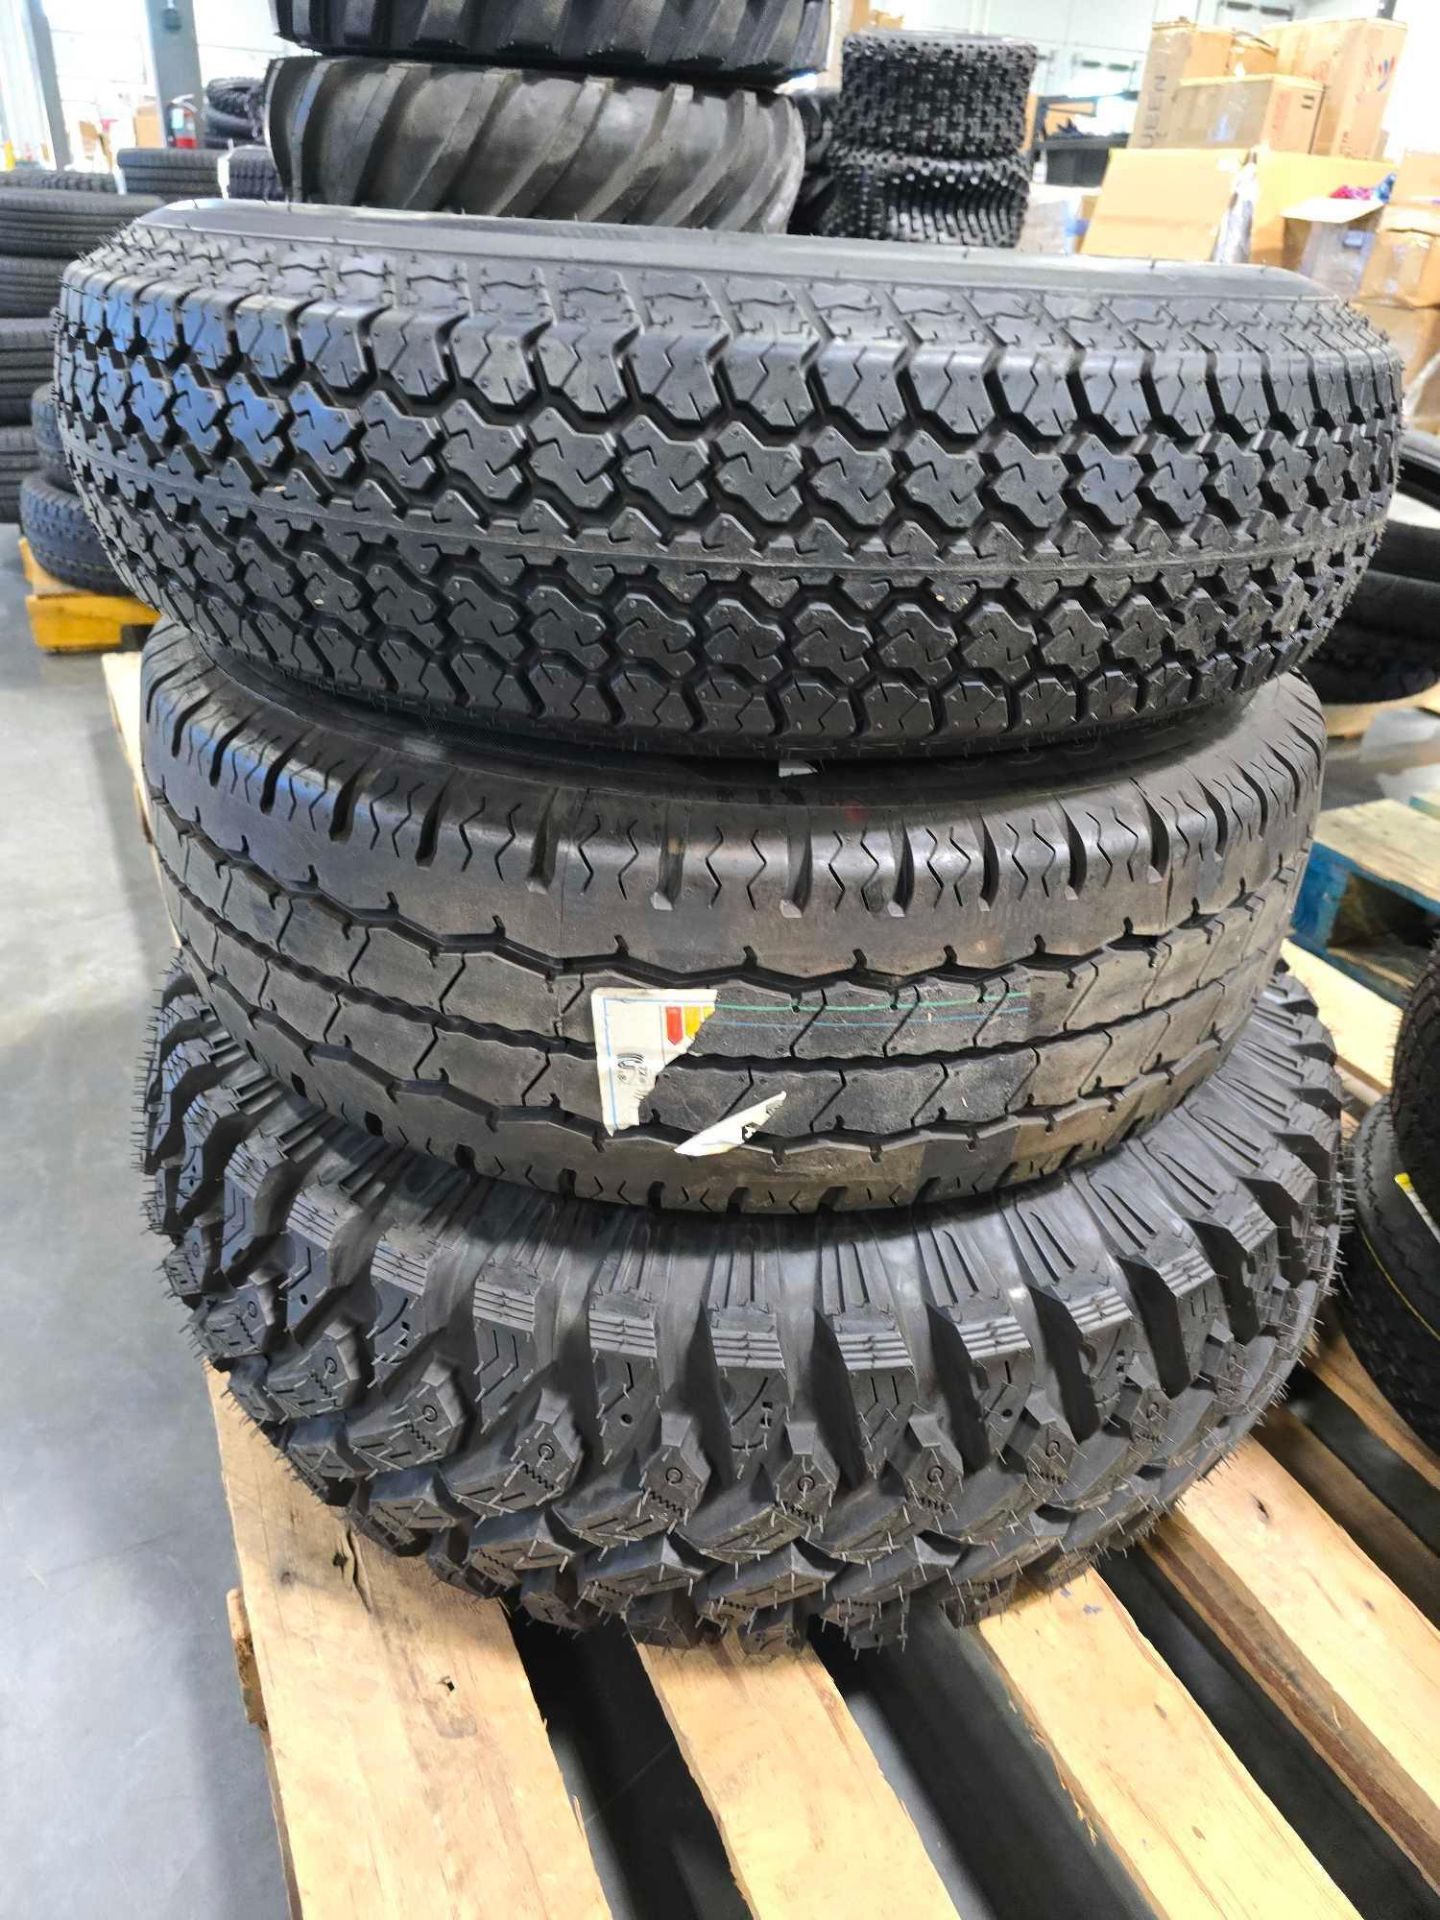 pallet of tires with rims - Image 6 of 11